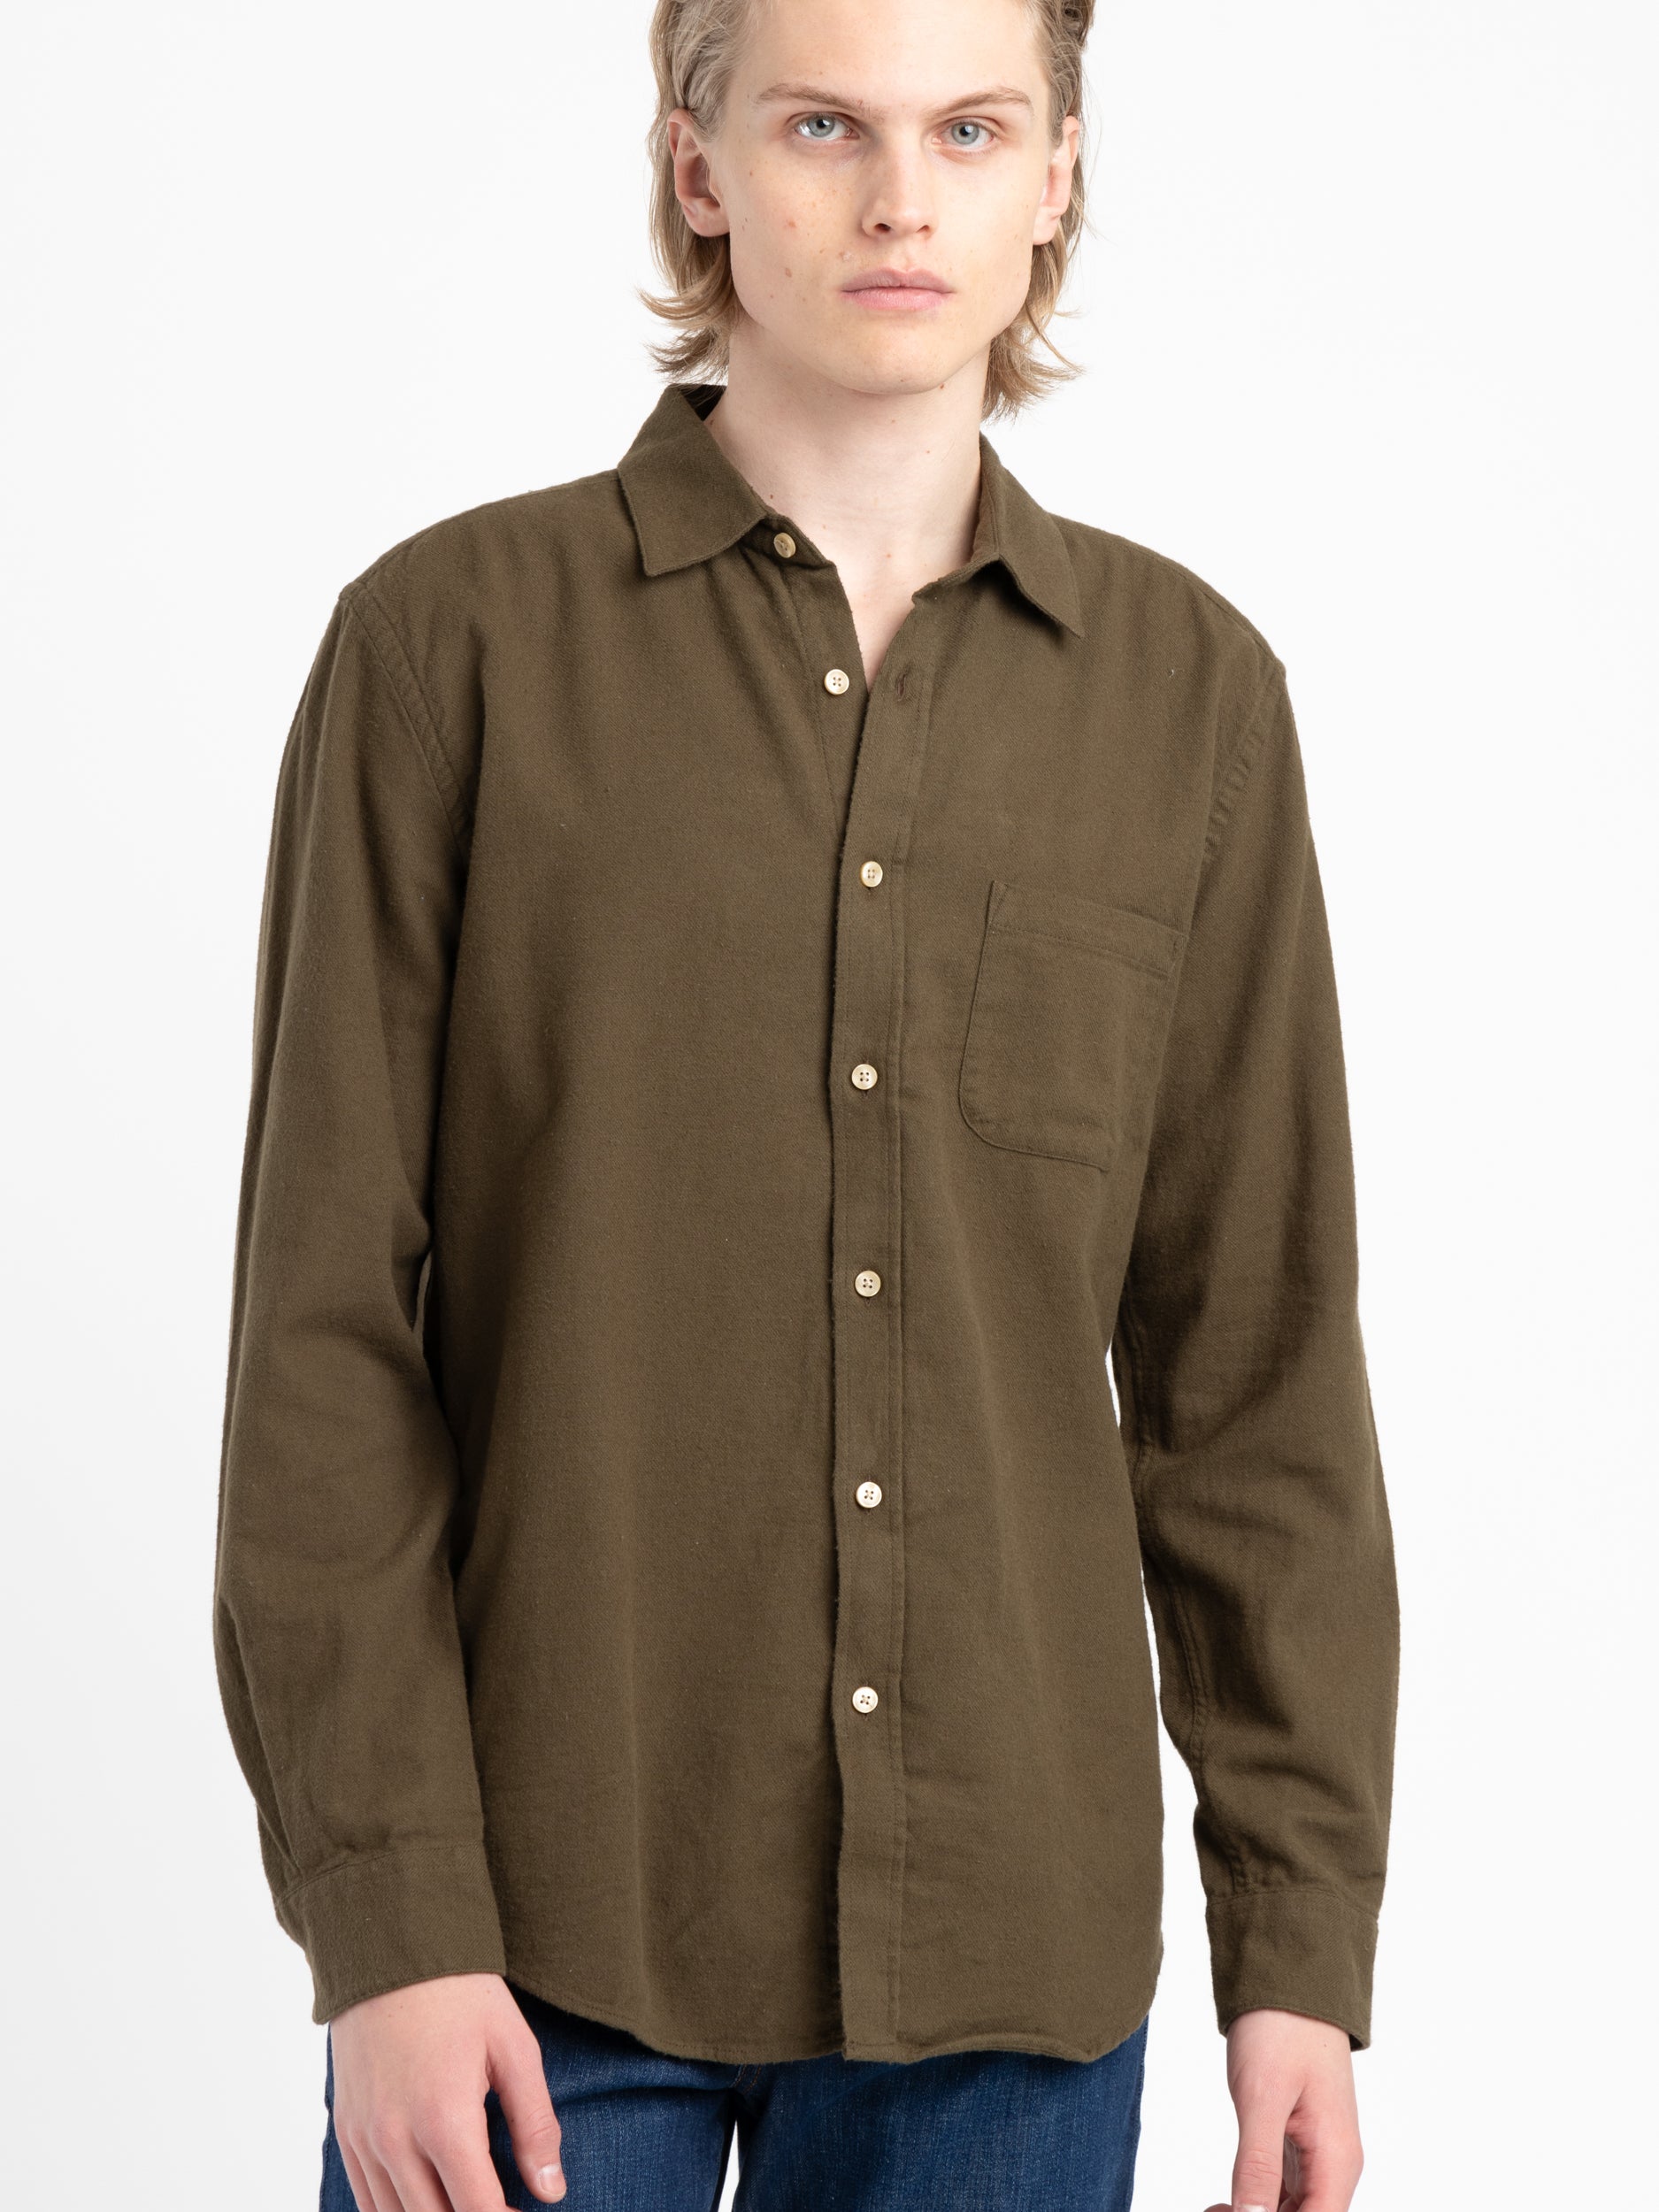 Olive Green Teca Flannel Shirt – The Helm Clothing